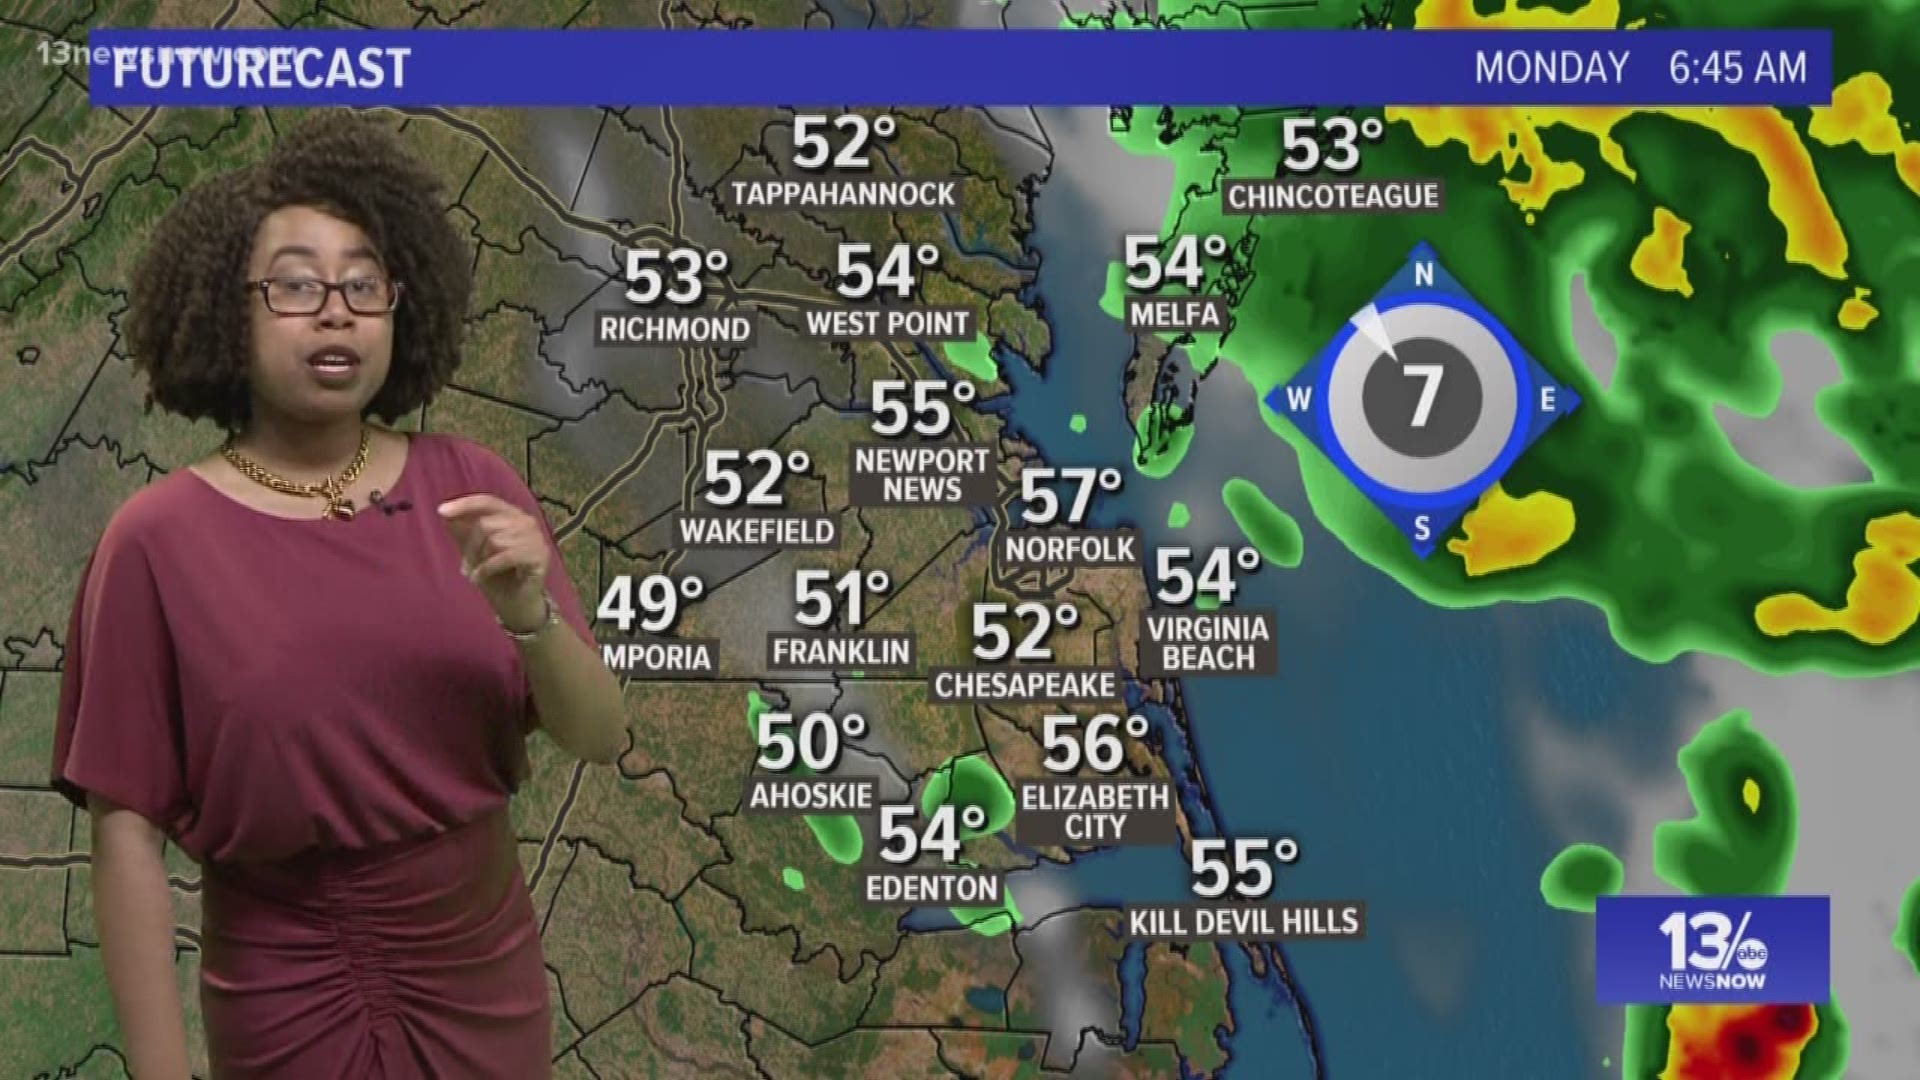 13News Now meteorologist Rachael Peart has the seven day forecast.